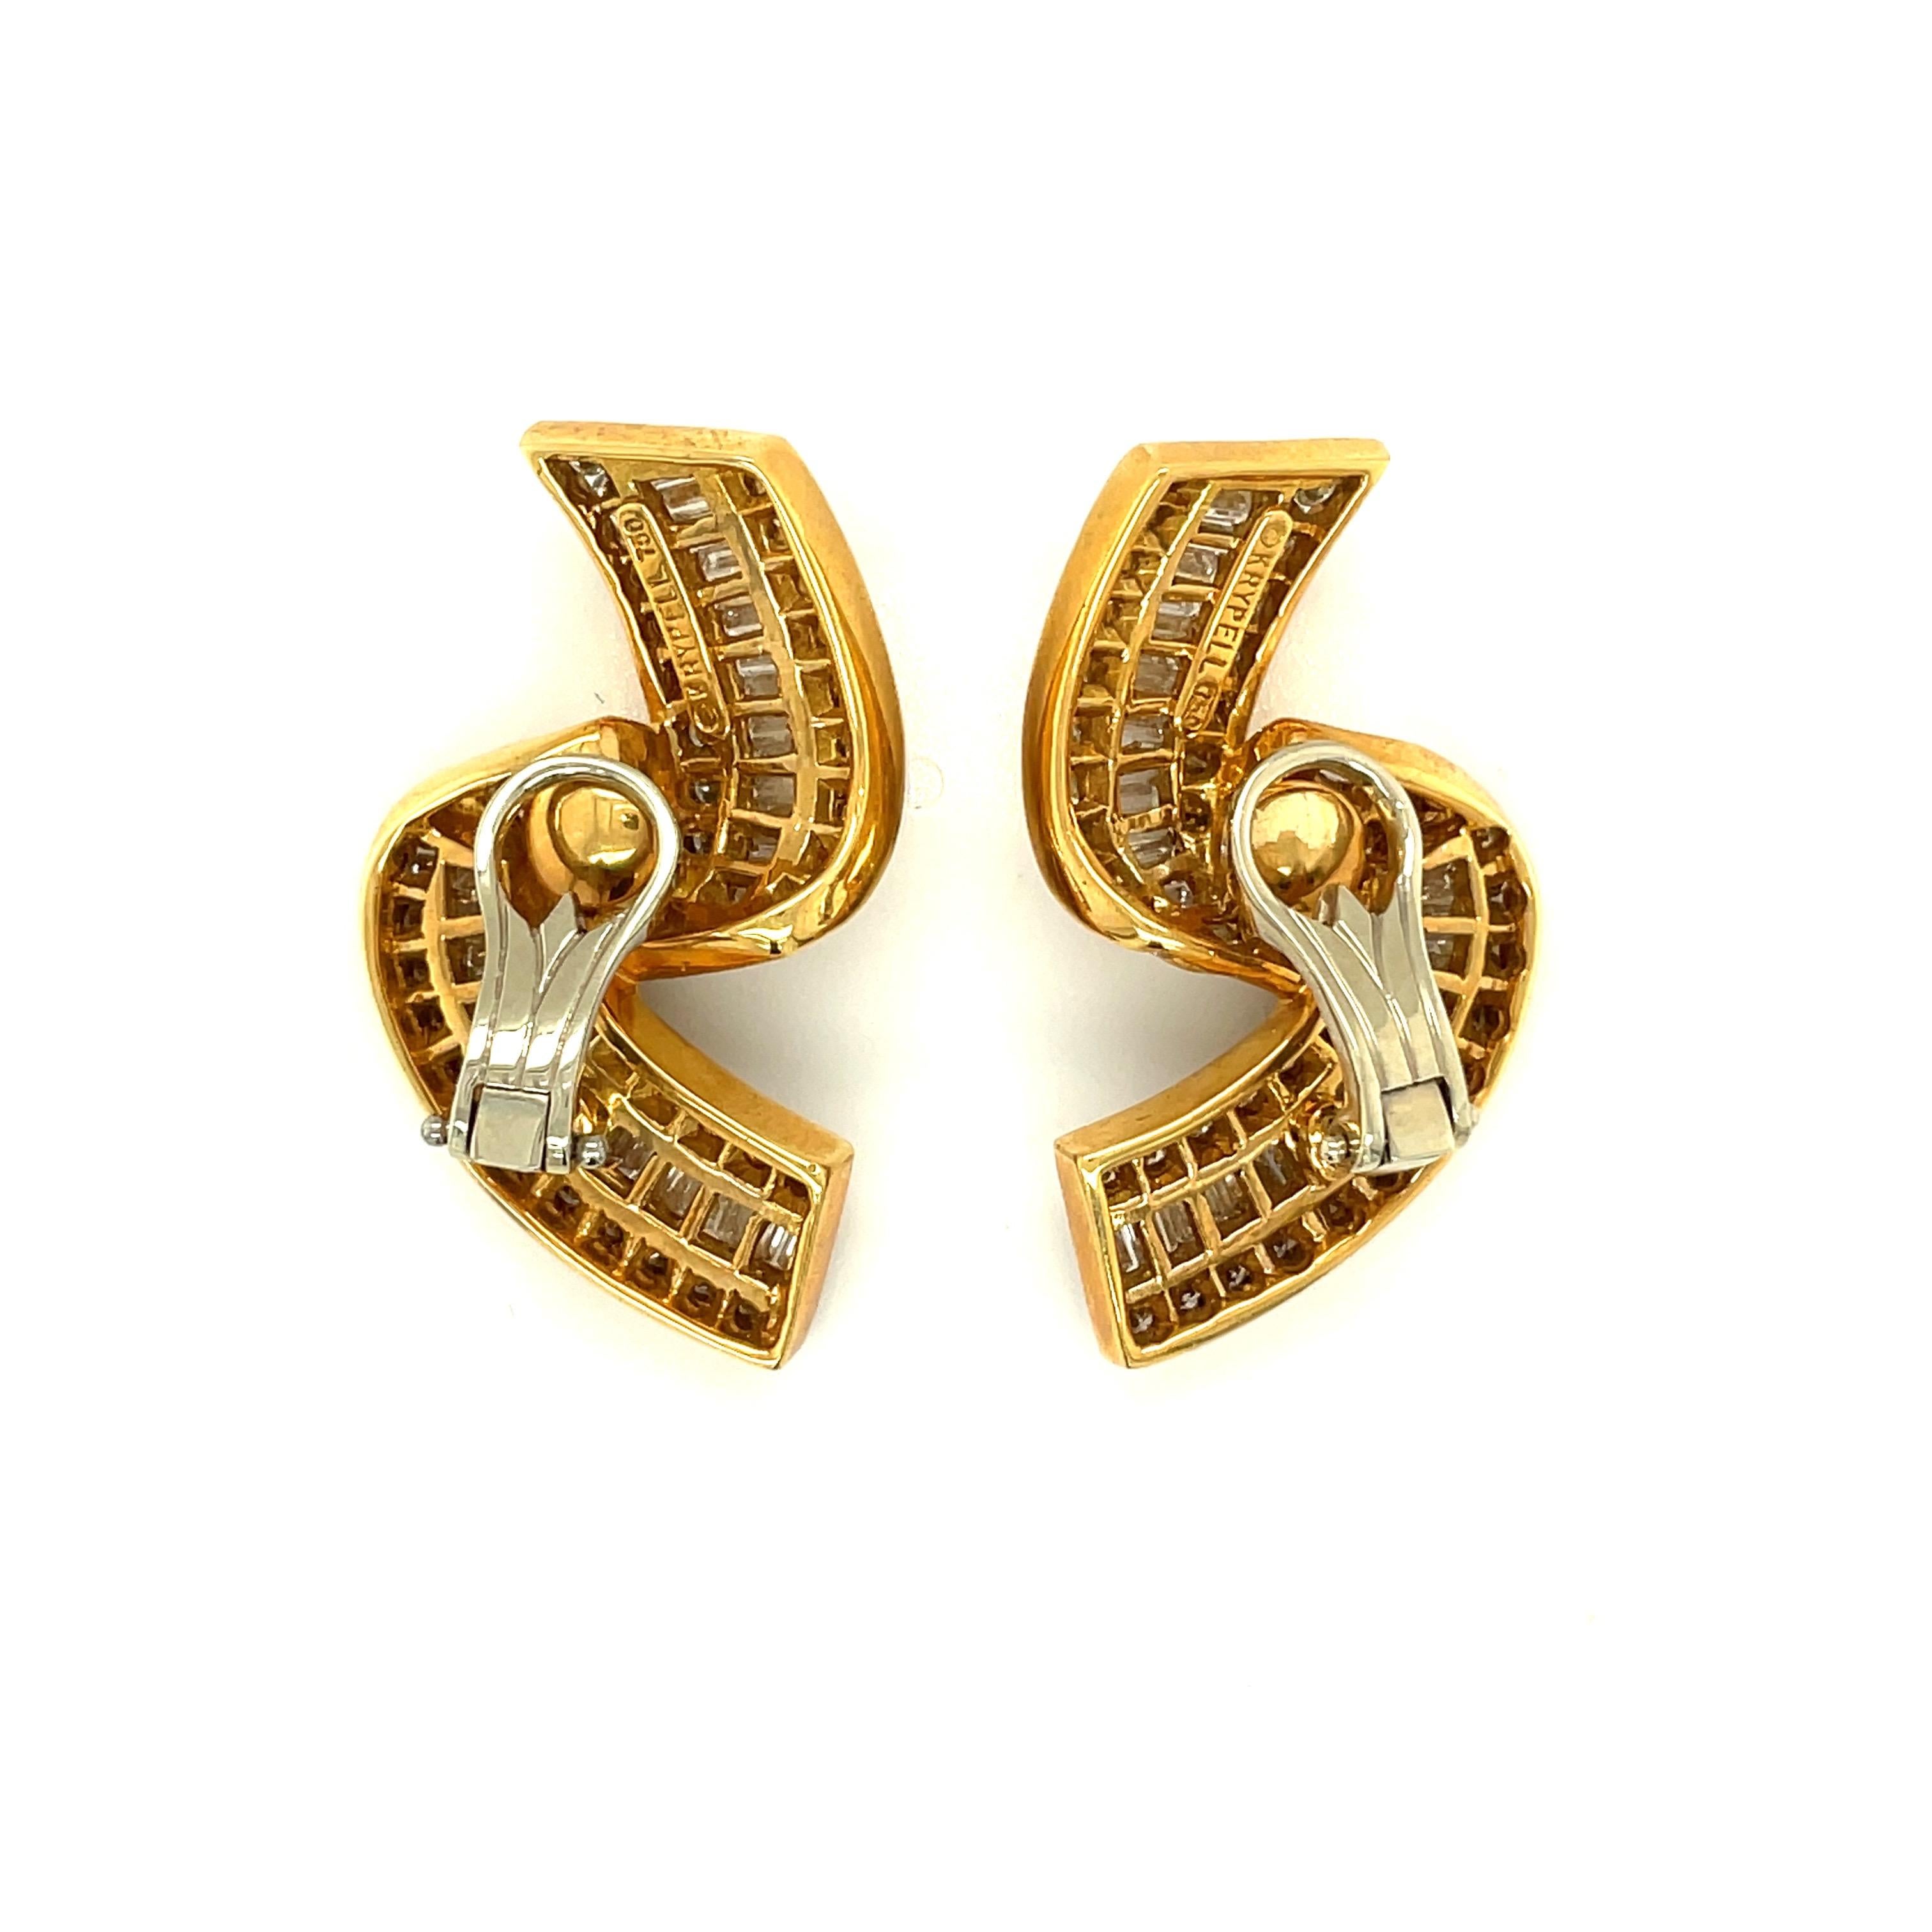 Charles Krypell Jewelry is a New York Based fine jewelry brand that became internationally known for its exquisite use of color, novel designs, and outstanding craftsmanship. 
Set in 18 Karat Yellow Gold, these earrings are designed as a free